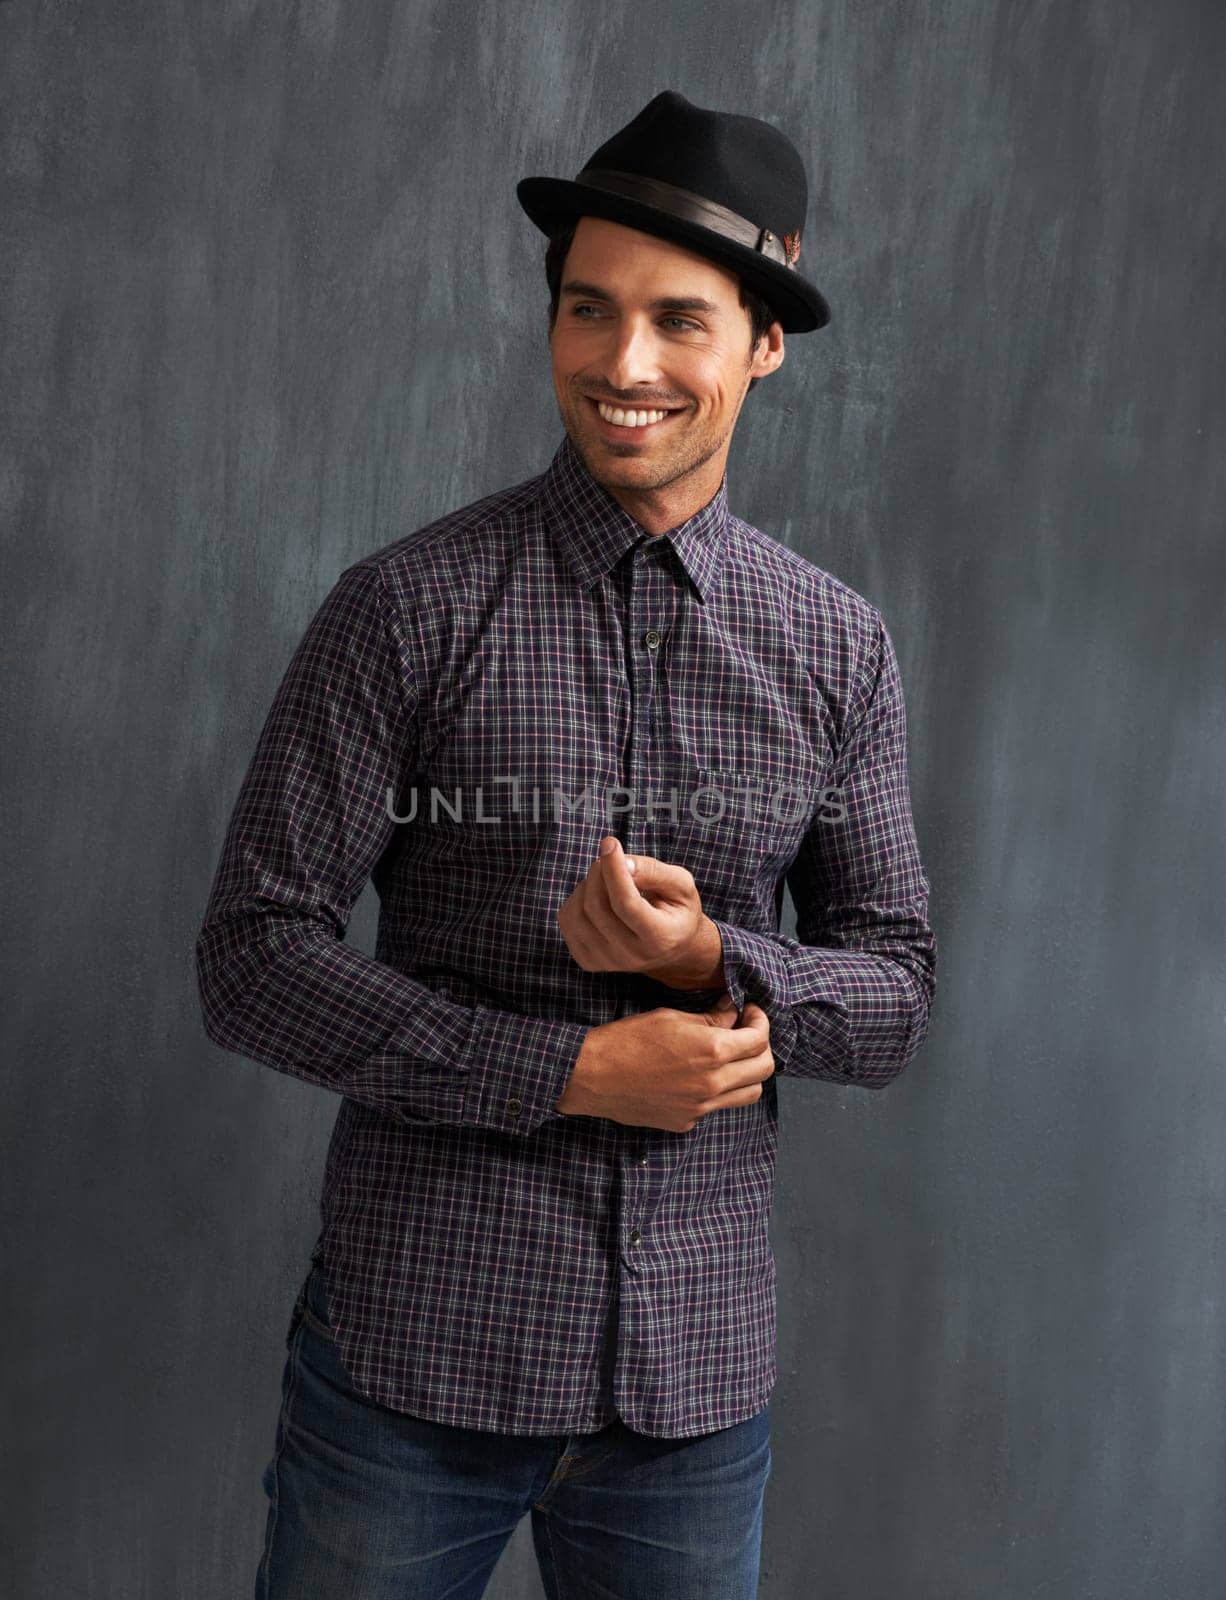 Fashion, happy and man on gray background with confidence in trendy style, clothes and casual outfit. Smile, handsome and face of person on texture wall with accessory, pride and positive attitude by YuriArcurs